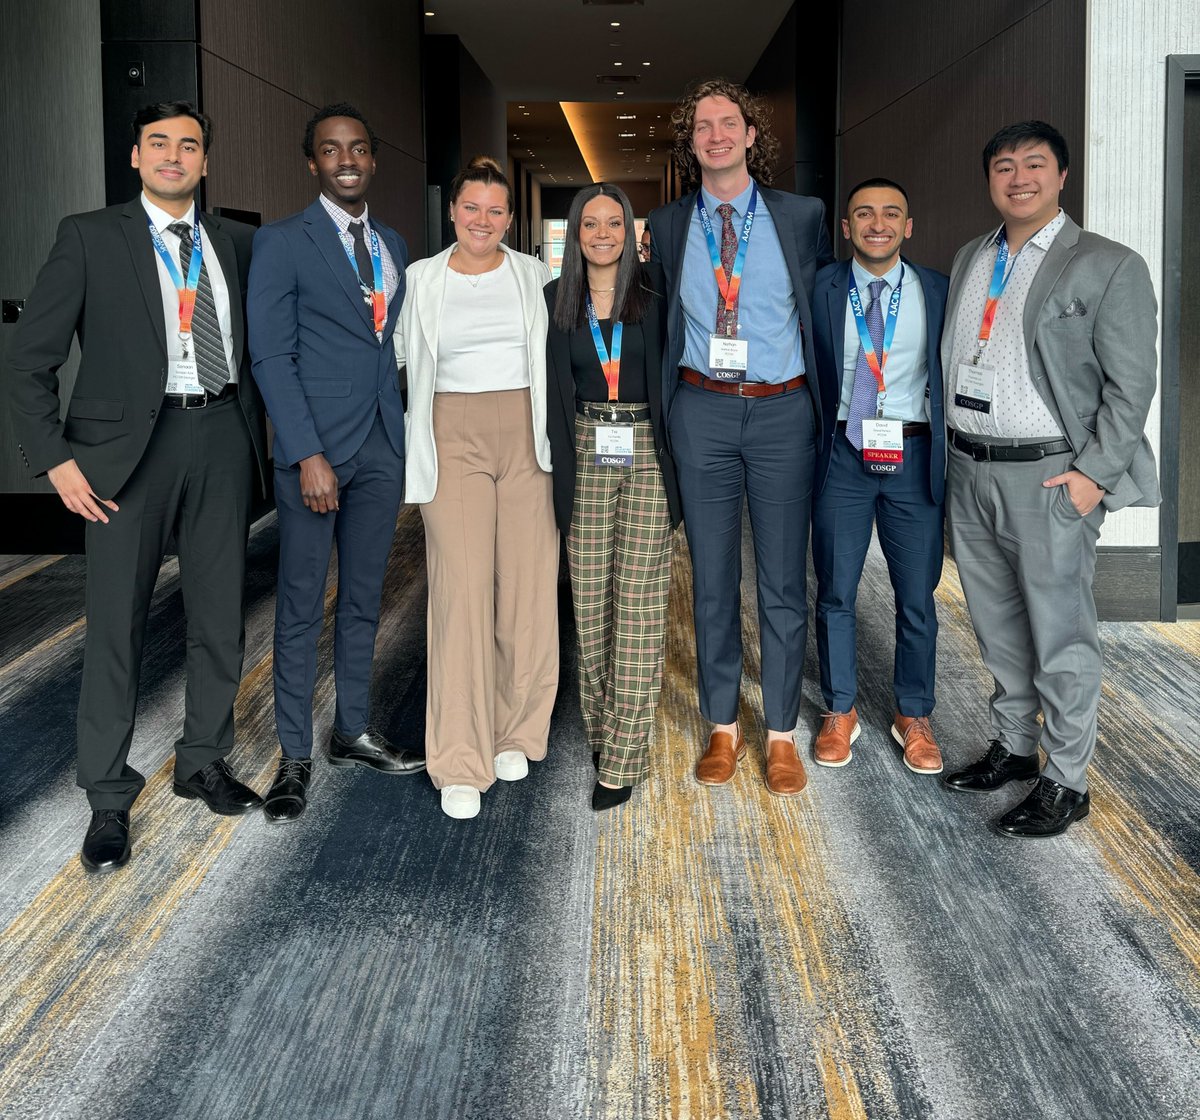 Current DO Council Presidents and Past Presidents from all three campus locations recently got together at the quarterly COSGP spring meeting, which took place alongside the AACOM Educating Leaders Conference in Kansas City! Way to represent, PCOM fam!